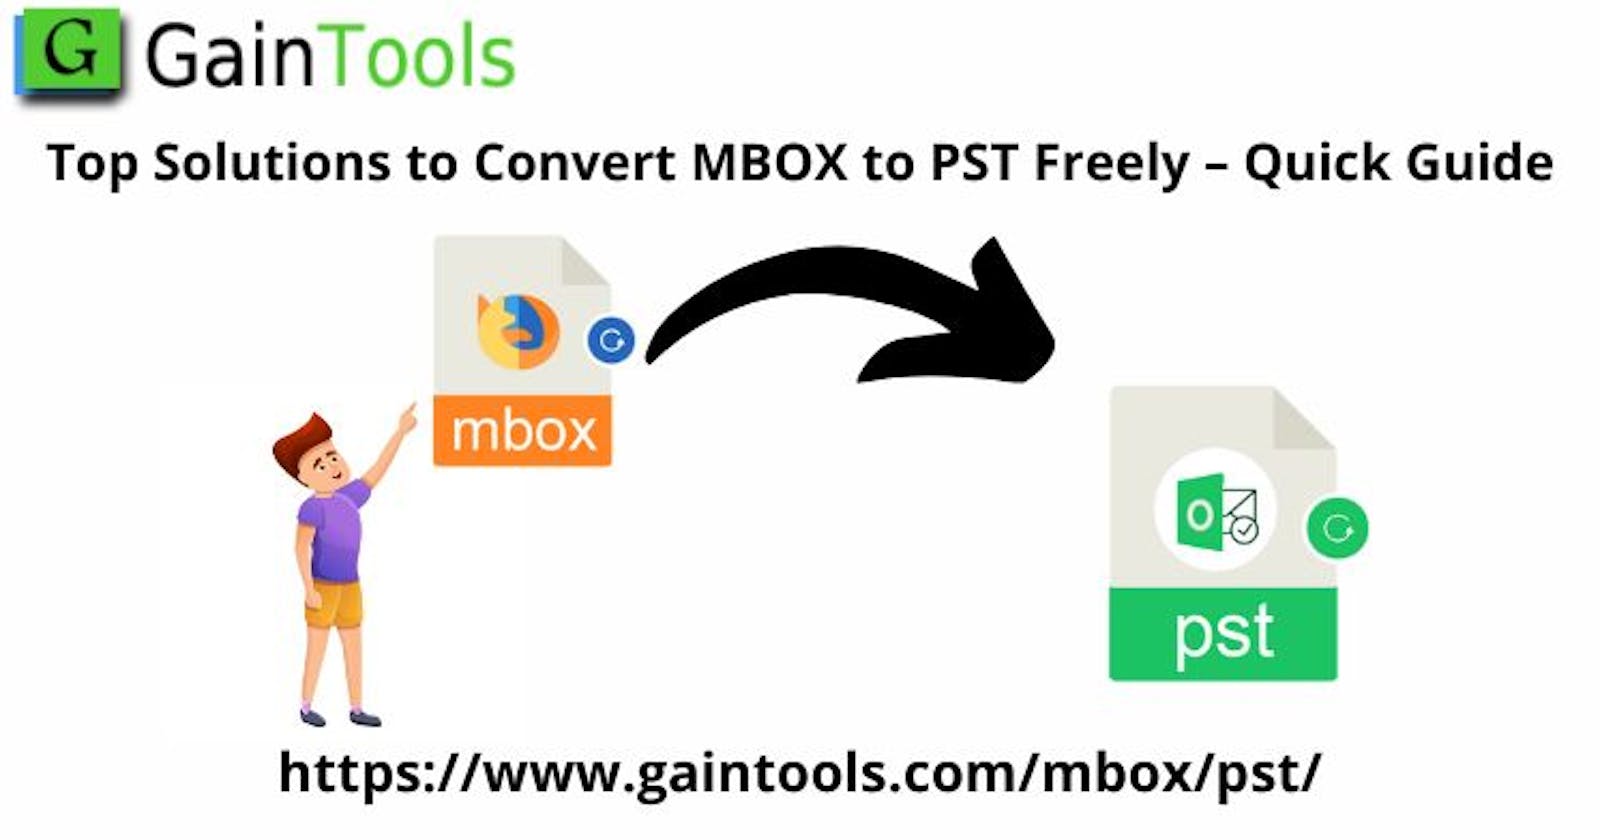 The Complete Guide to Barrier-Free MBOX to Outlook Integration